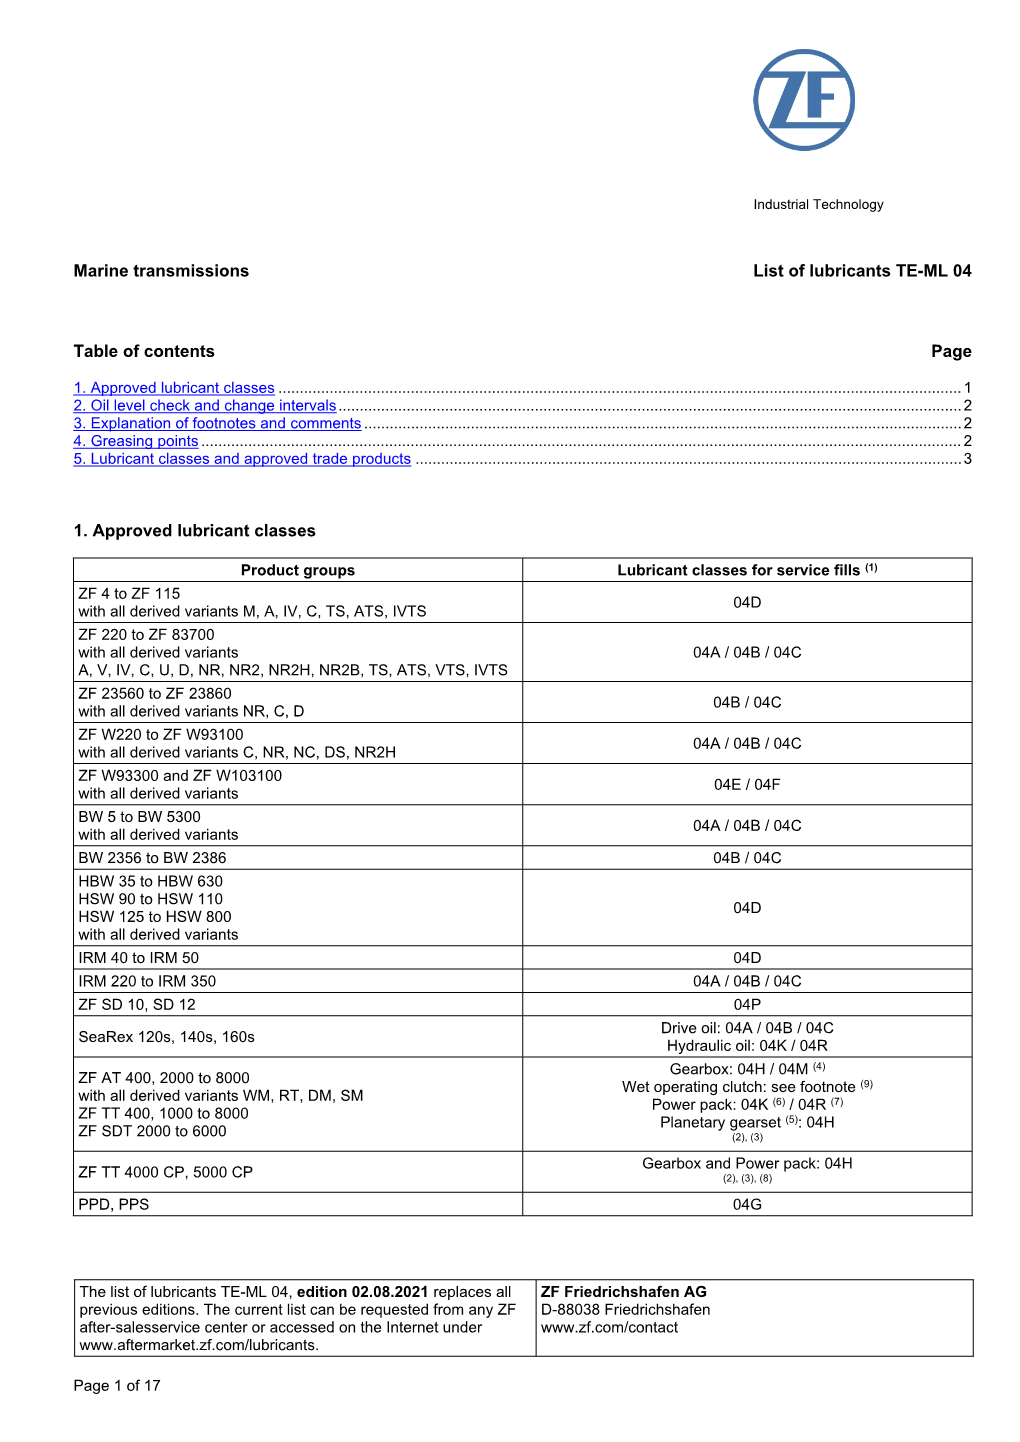 Marine Transmissions List of Lubricants TE-ML 04 Table of Contents Page 1